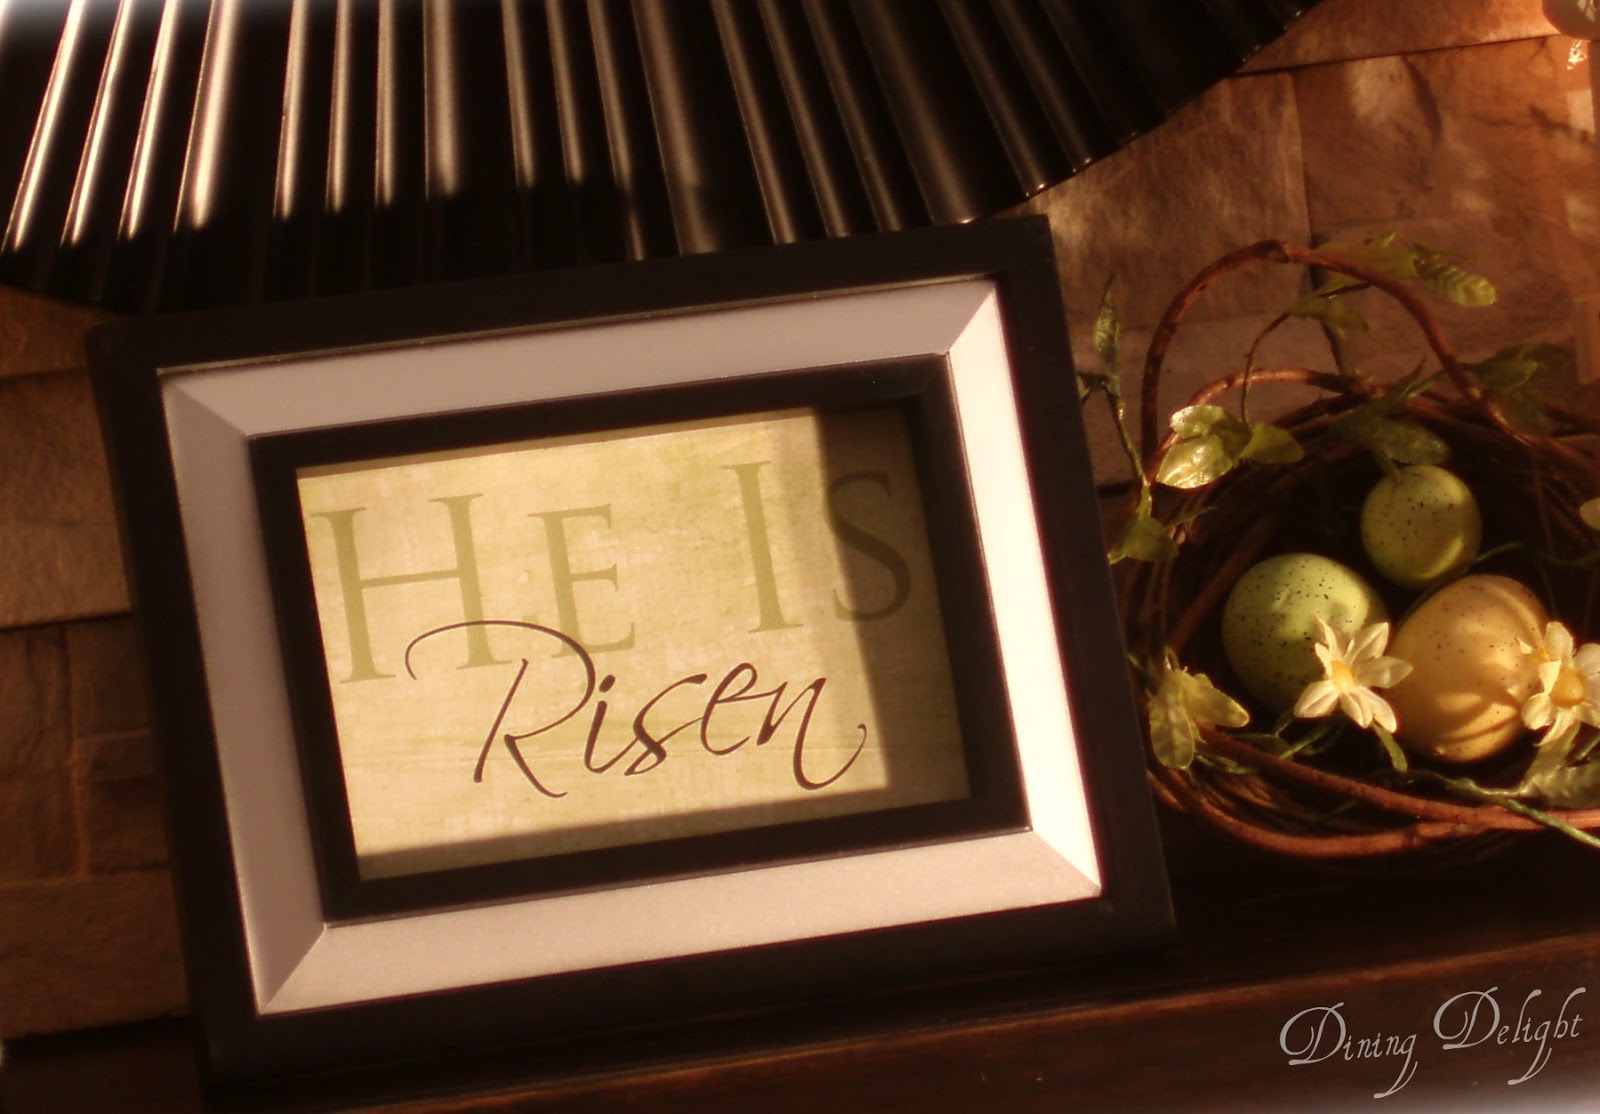 Dining Delight: He is Risen!